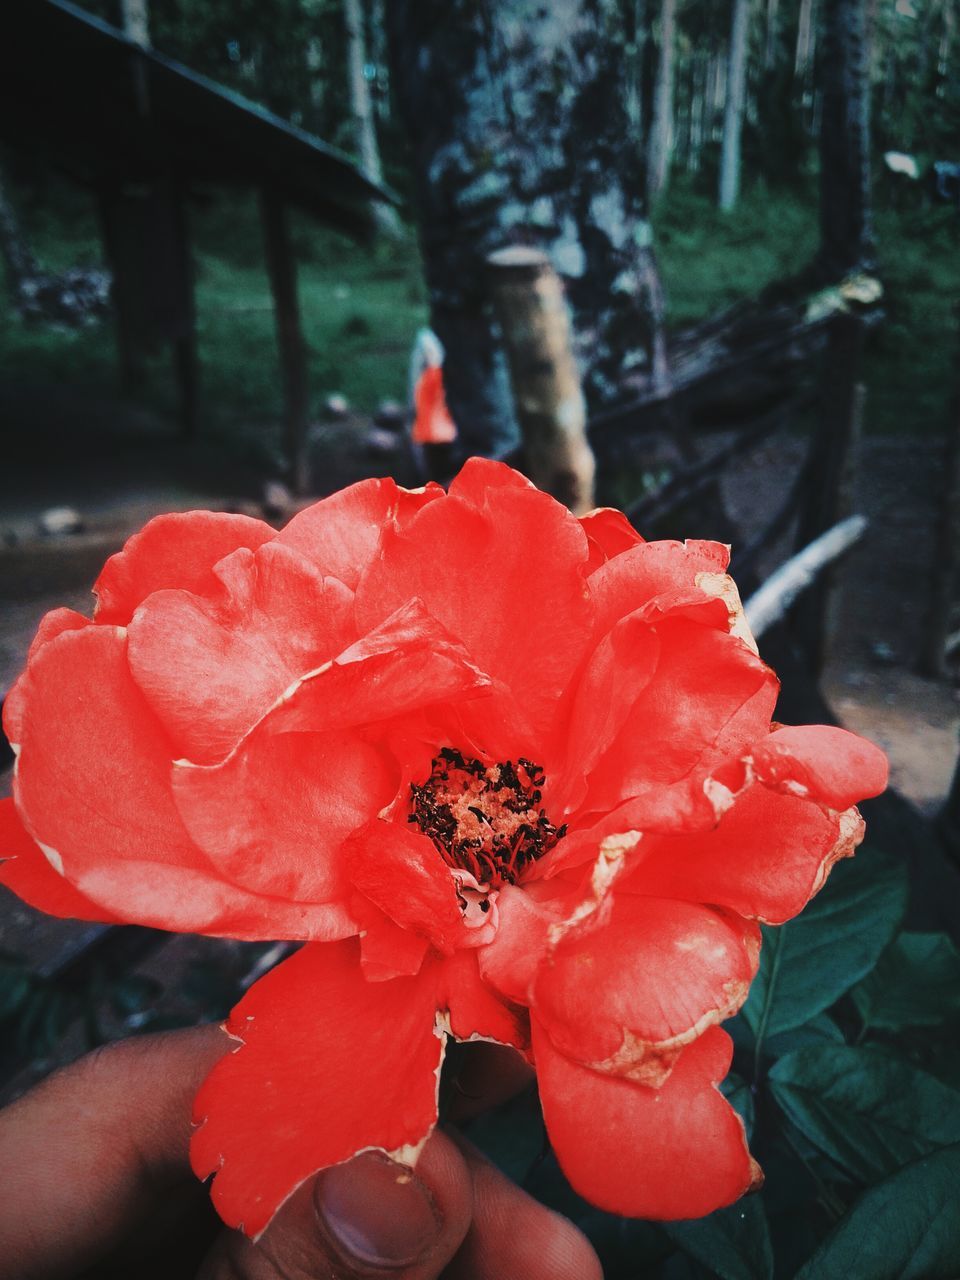 flower, red, petal, nature, beauty in nature, outdoors, one person, holding, freshness, fragility, day, focus on foreground, human hand, flower head, real people, close-up, human body part, plant, hibiscus, people